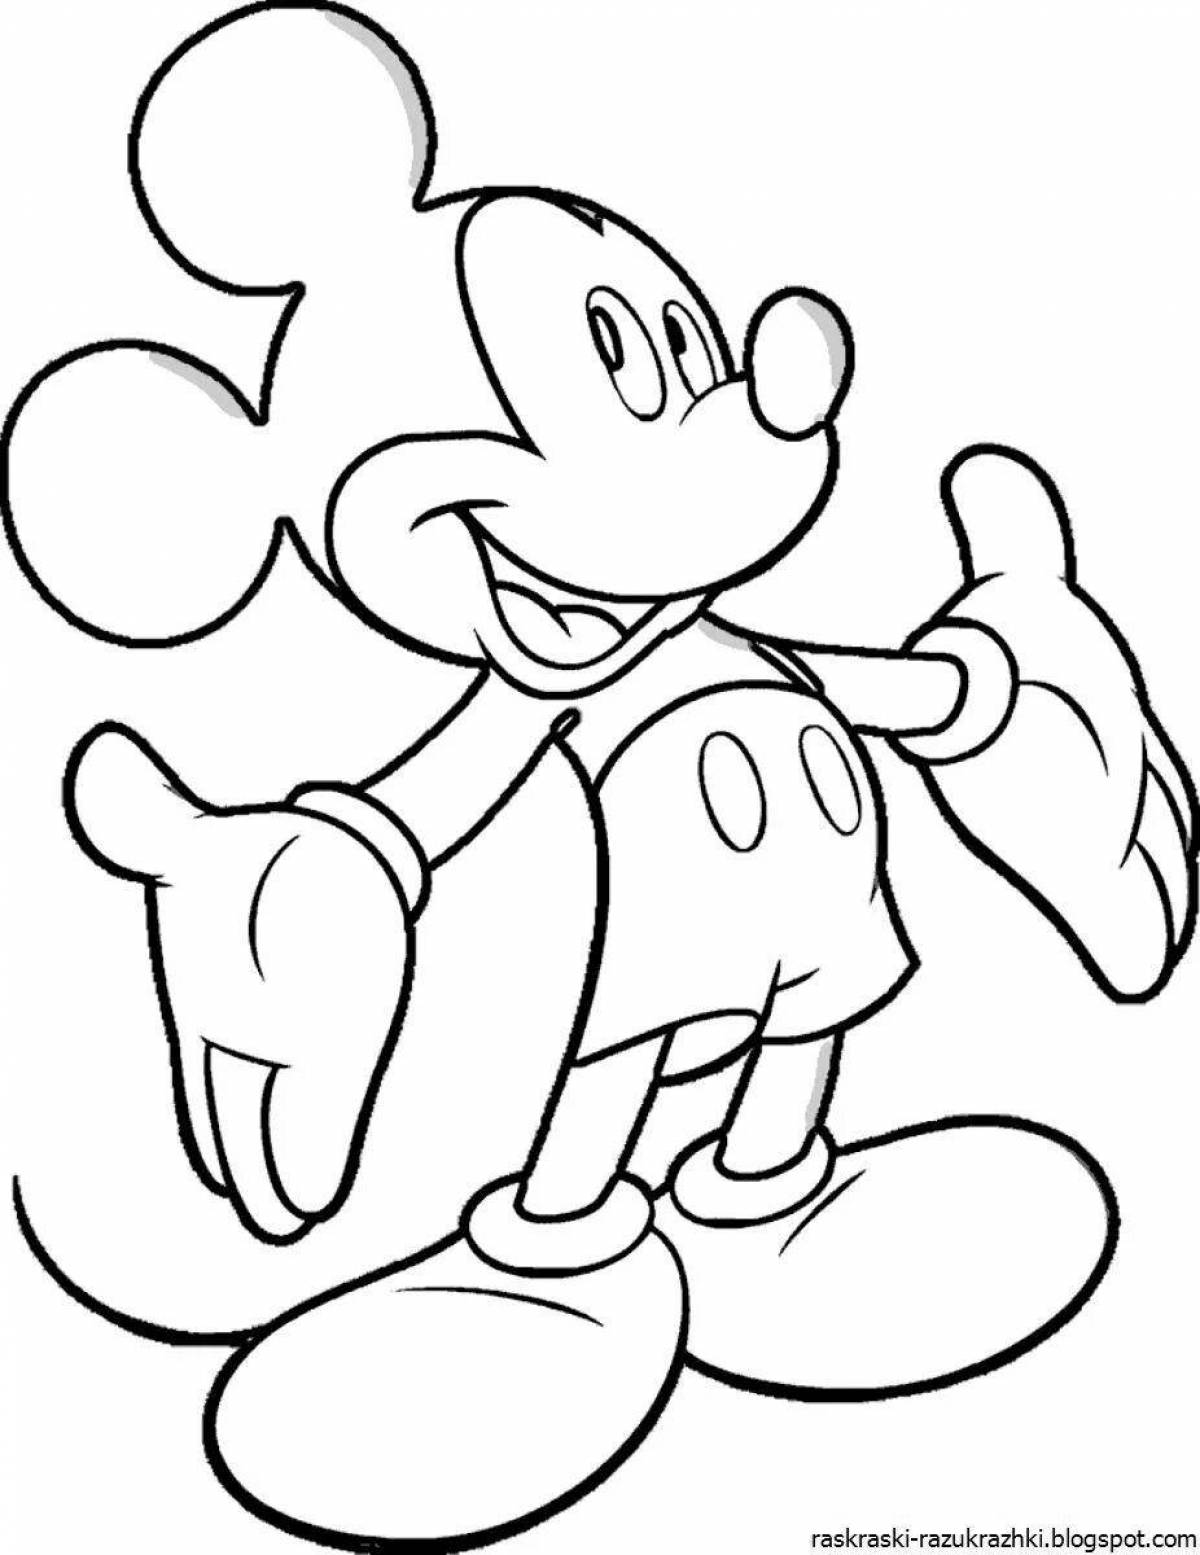 Coloring page of a fun cartoon character